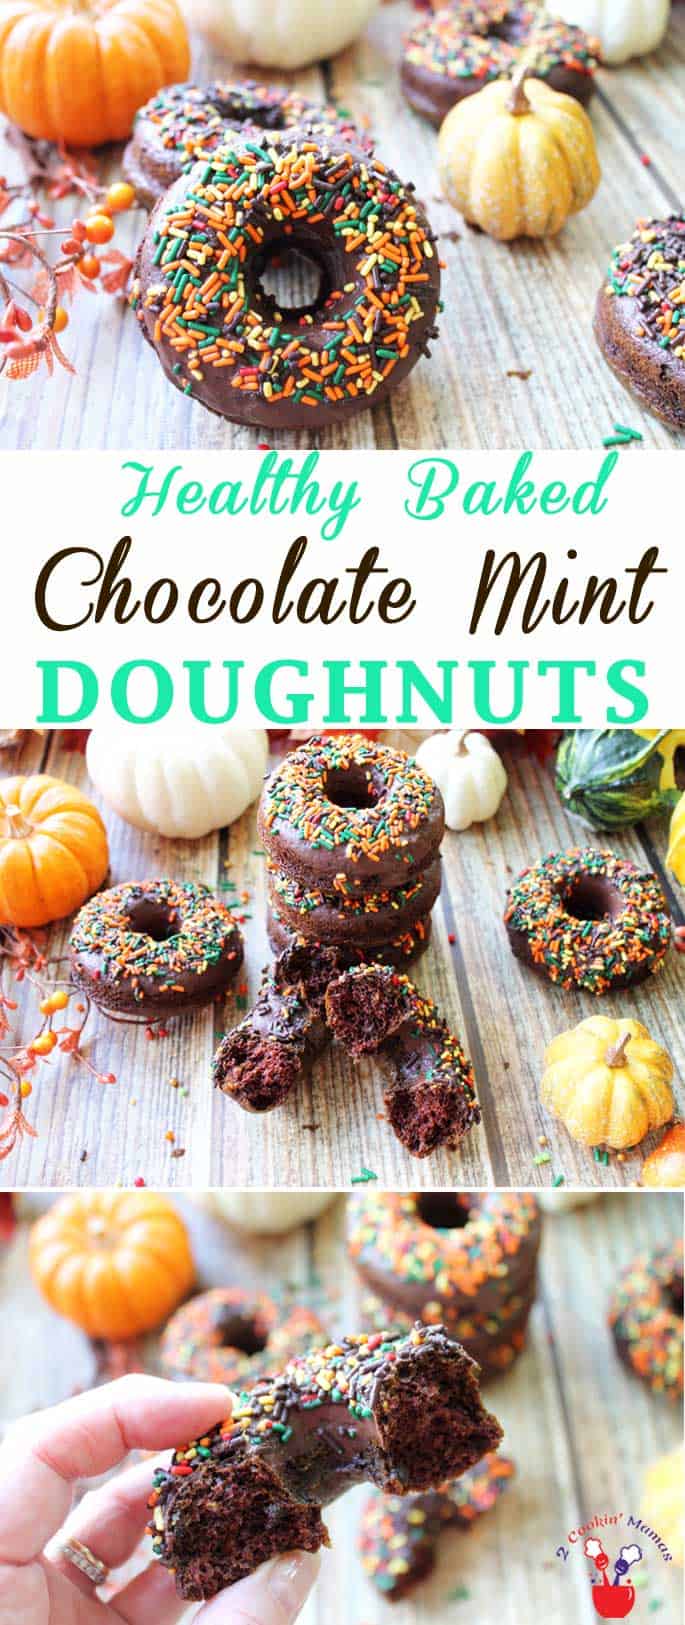 Healthy Baked Chocolate Mint Doughnuts